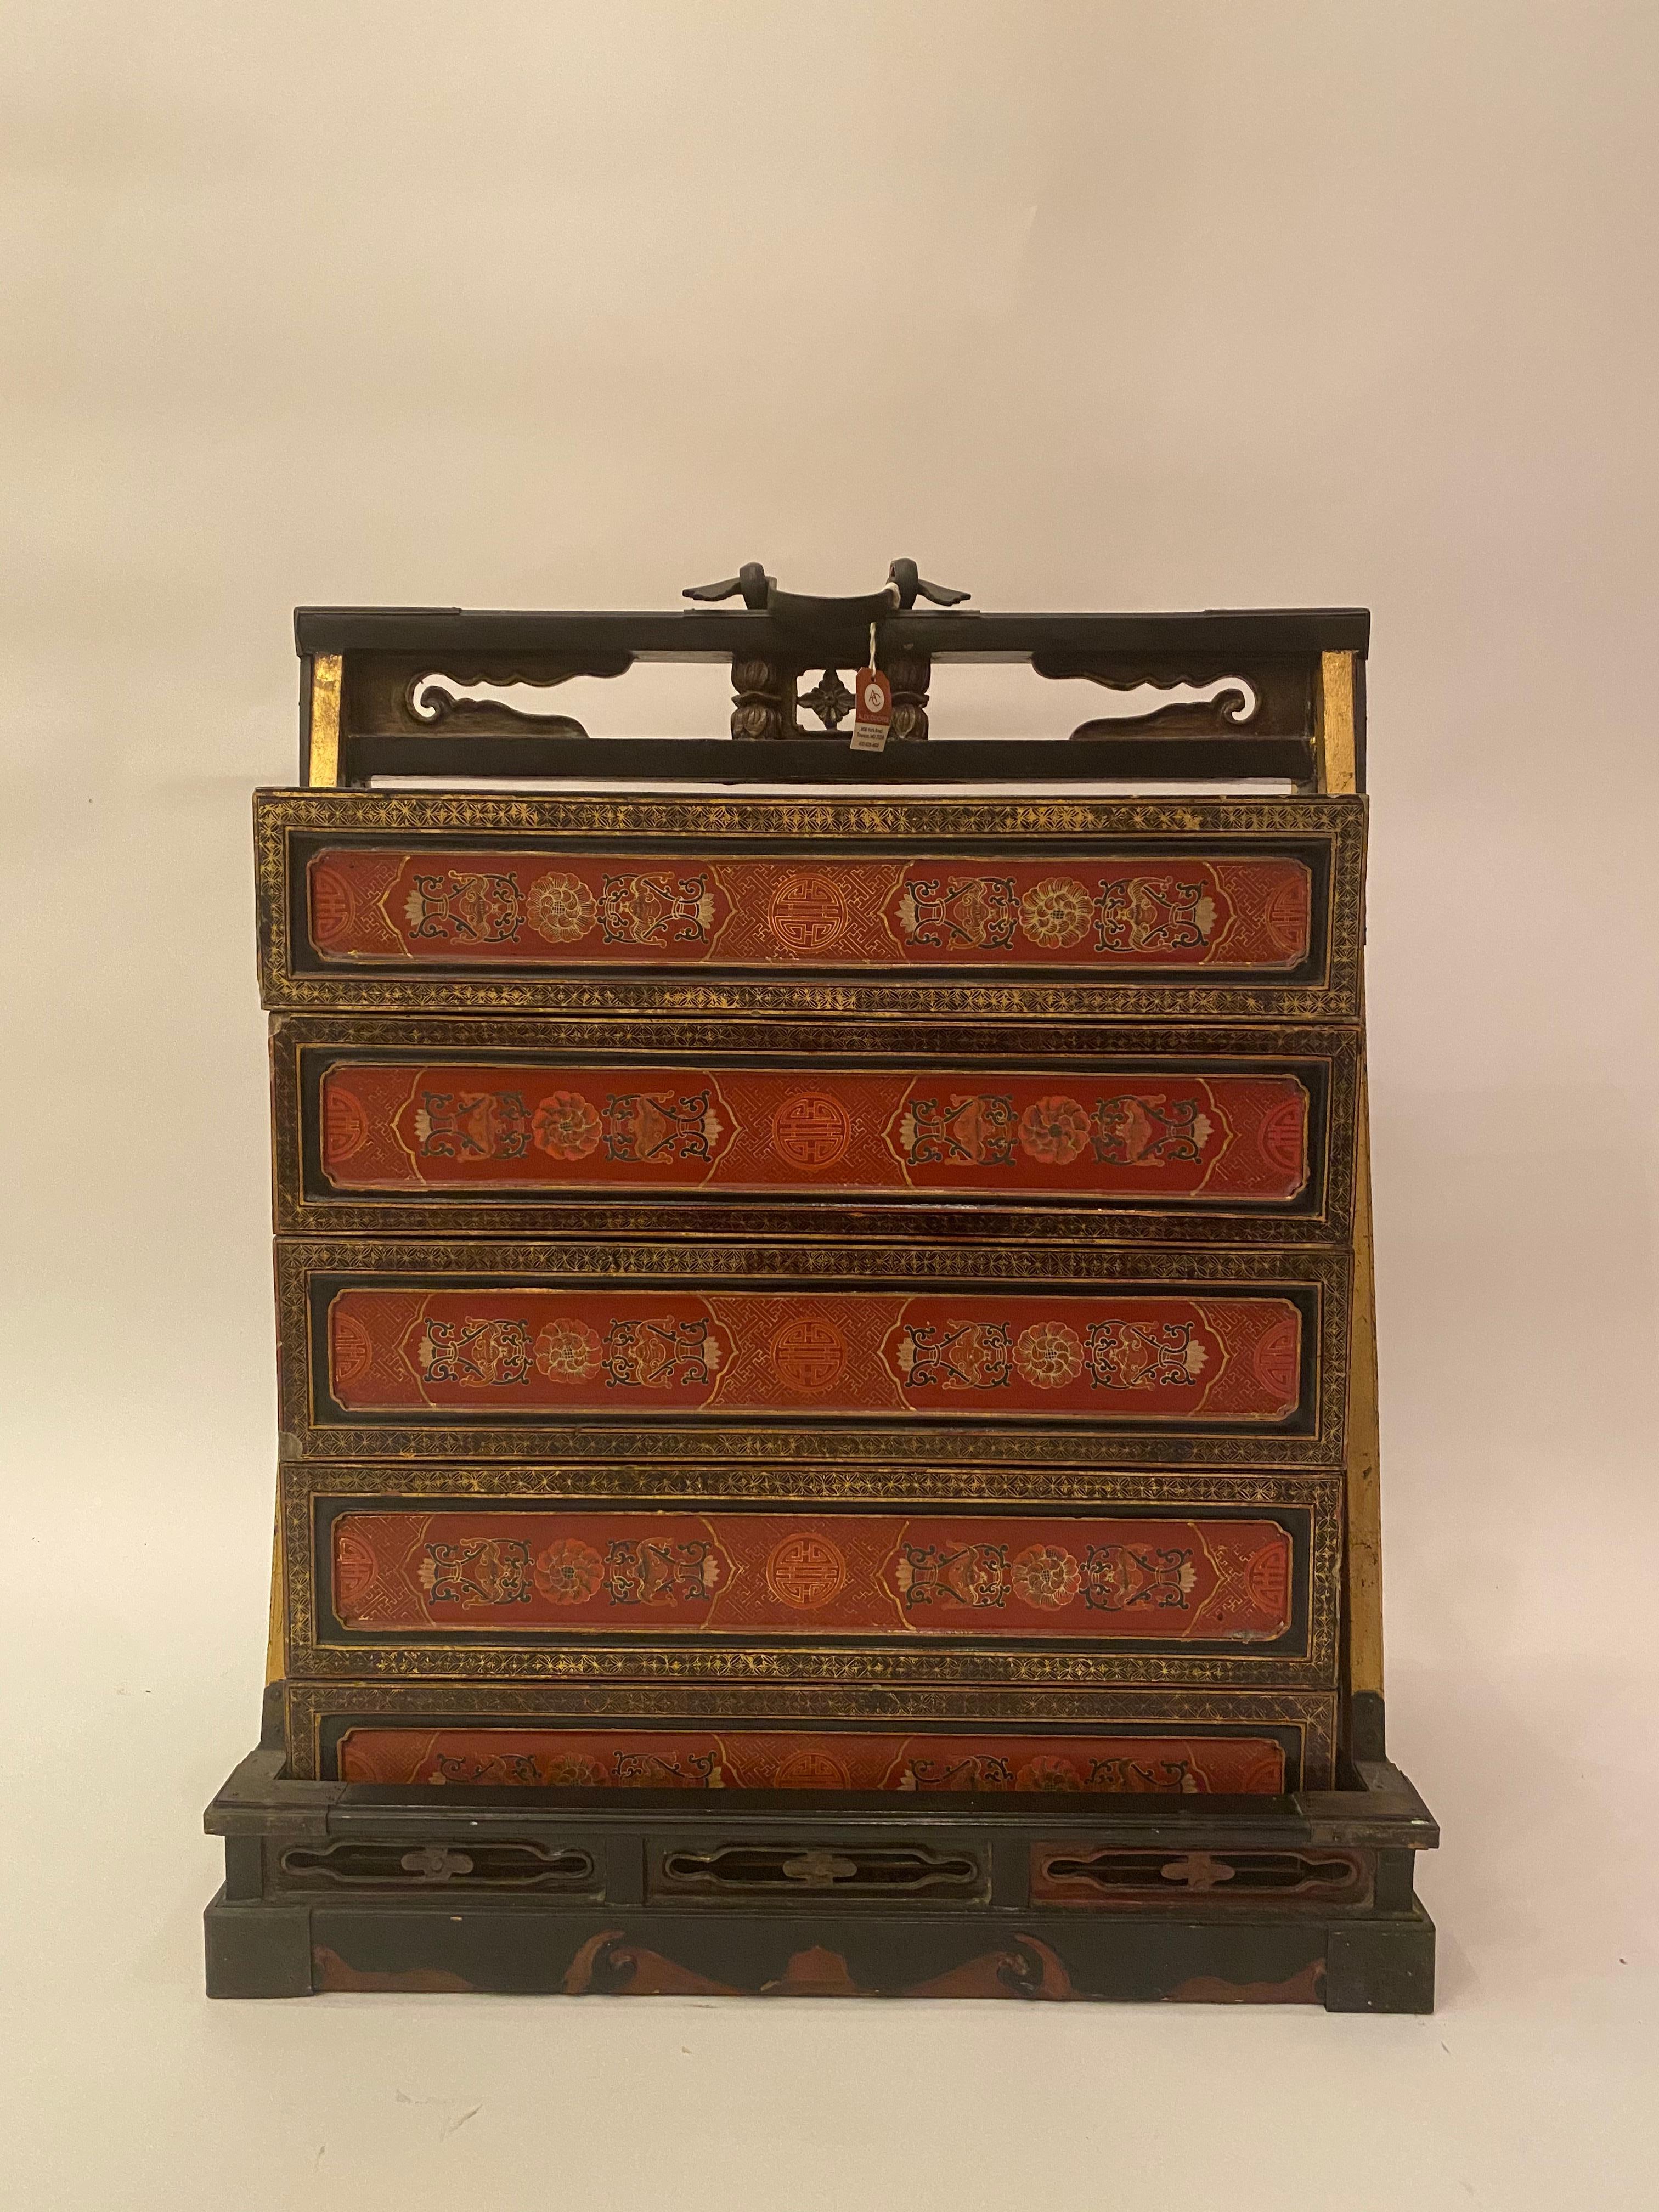 19th century large Chinese lacquer wedding or travel box from the Qing dynasty. Beautiful intricate designs all-over with images of ancient Chinese people on top.